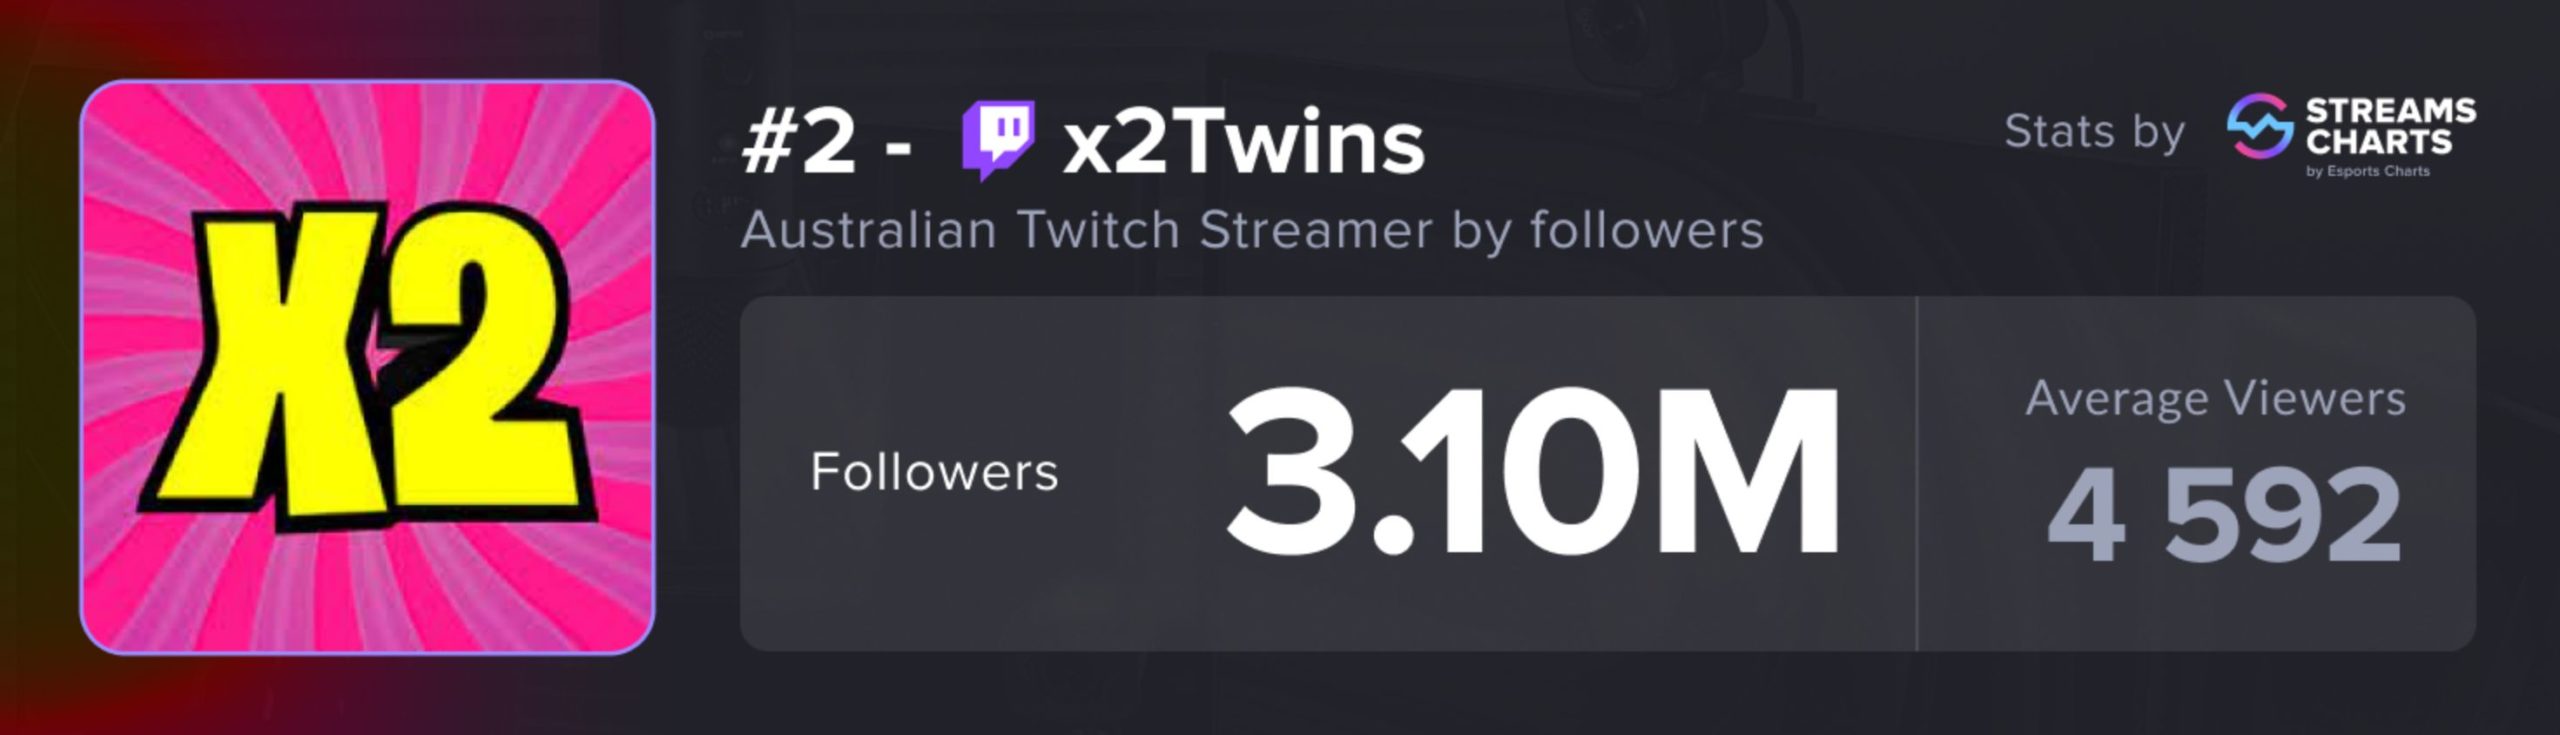 x2 Twins - Twitch Ratings